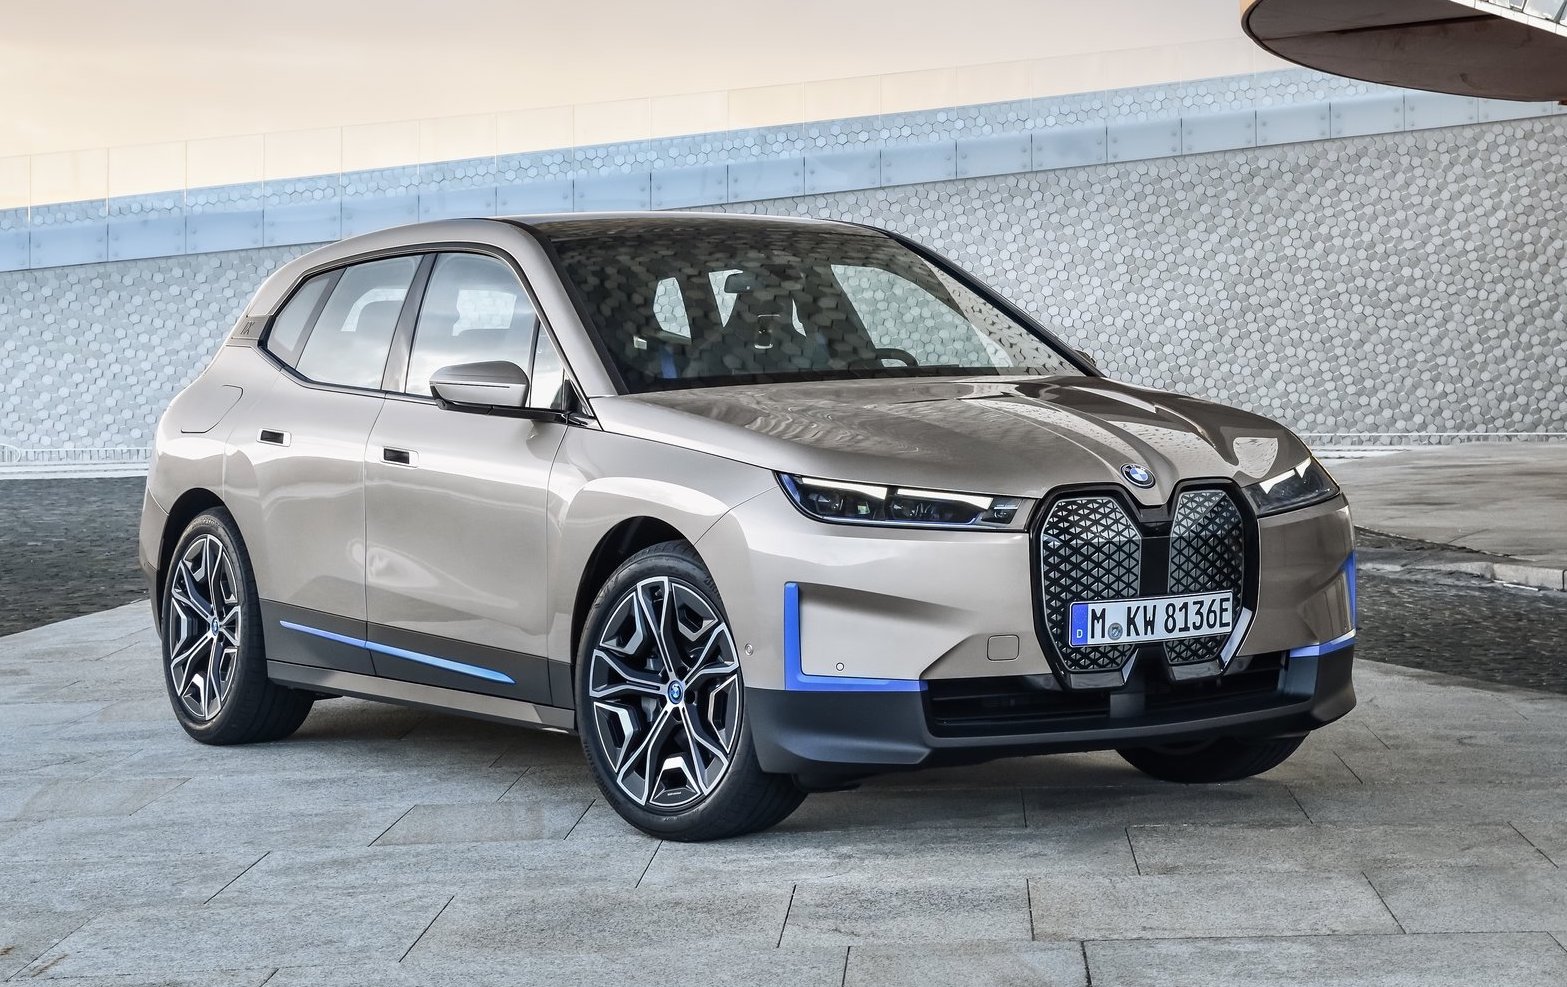 Electric BMW iX revealed, production confirmed for 2021